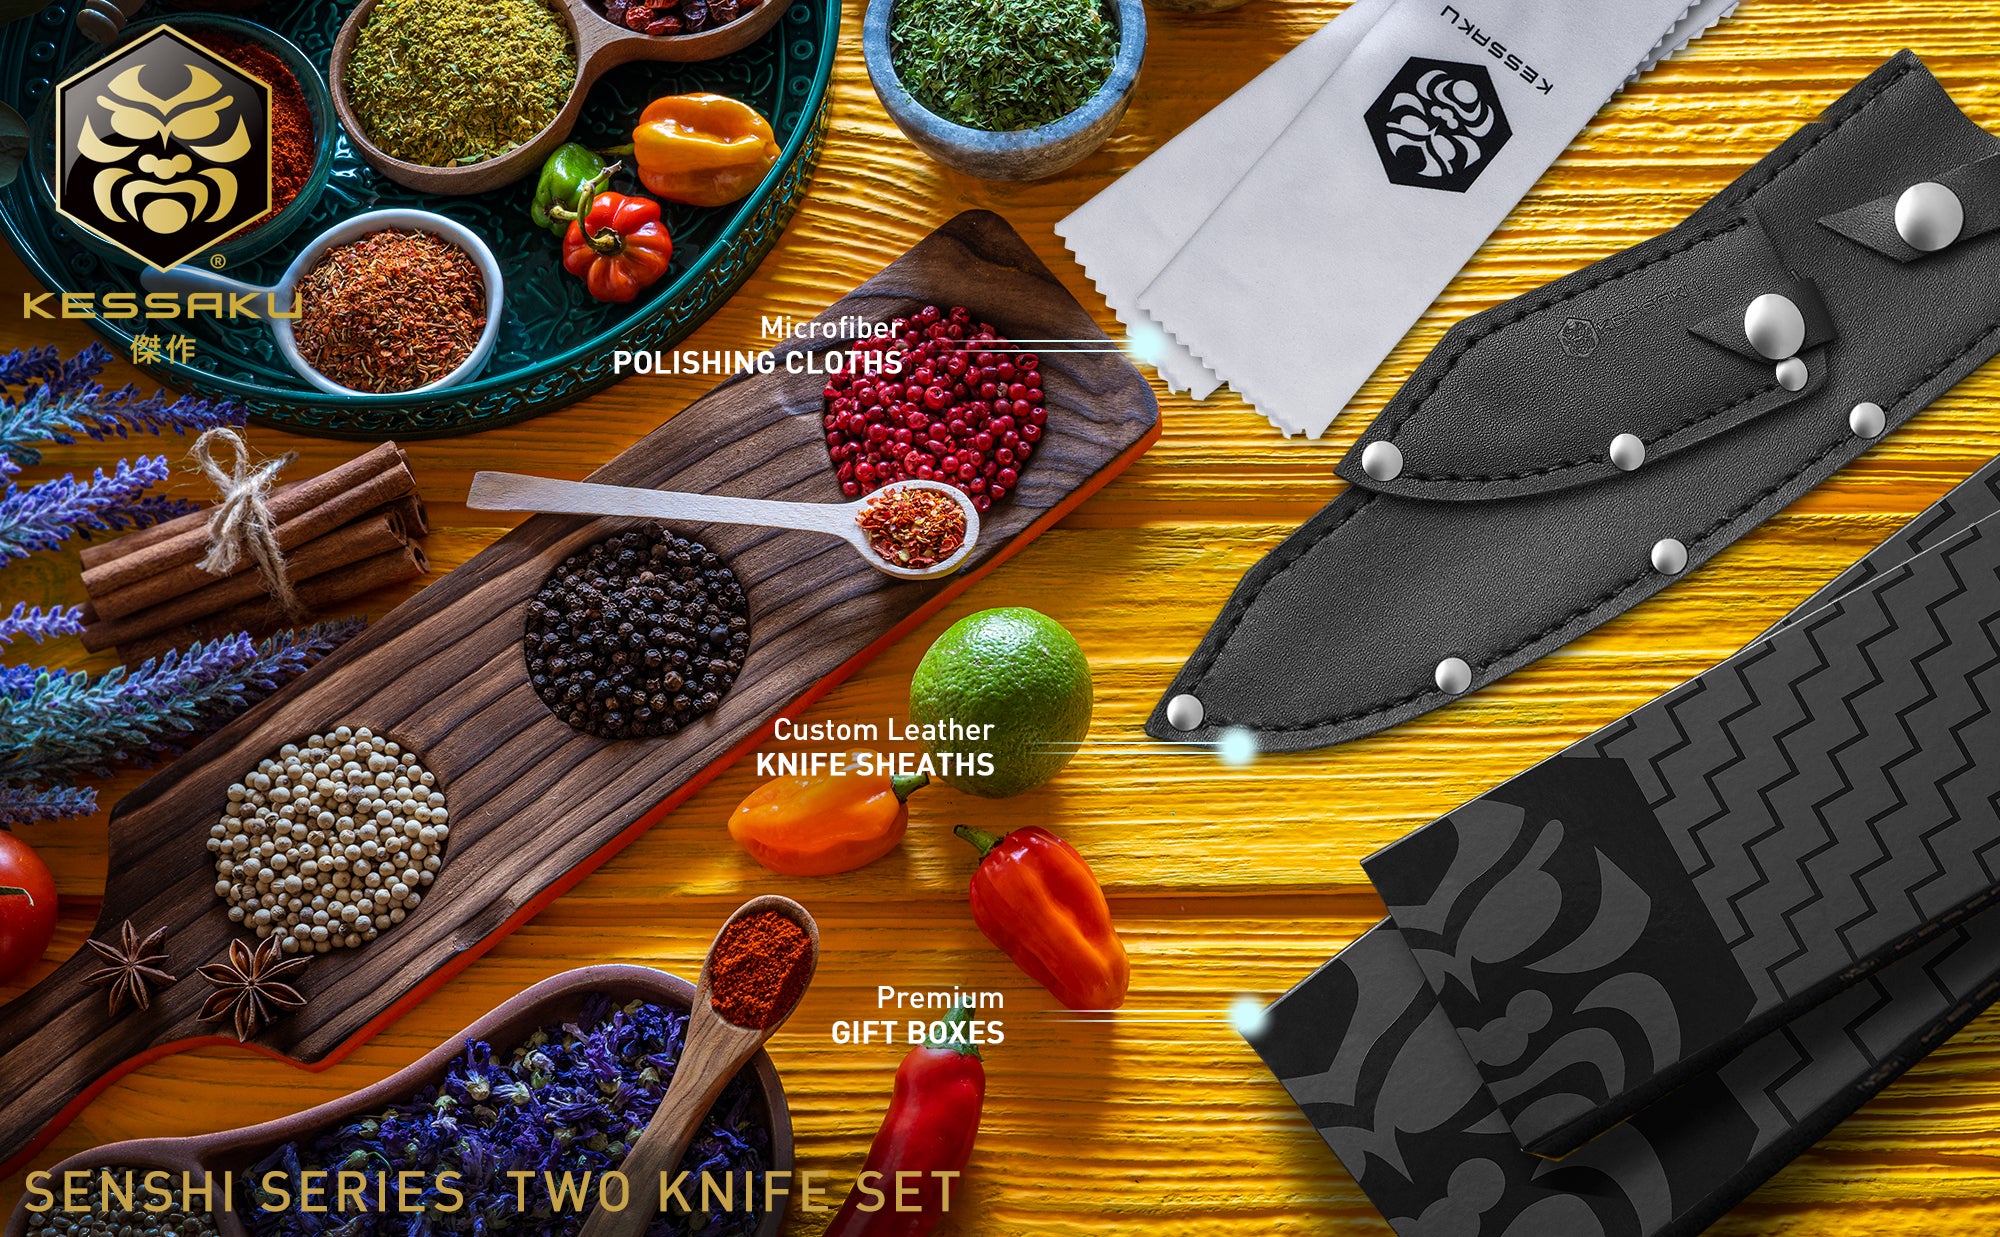 The Kessaku Senshi Series 8-Inch Chef's and 3.5-Inch Paring Knives come with leather knife sheaths with snap closures, polishing cloths, and premium gift boxes